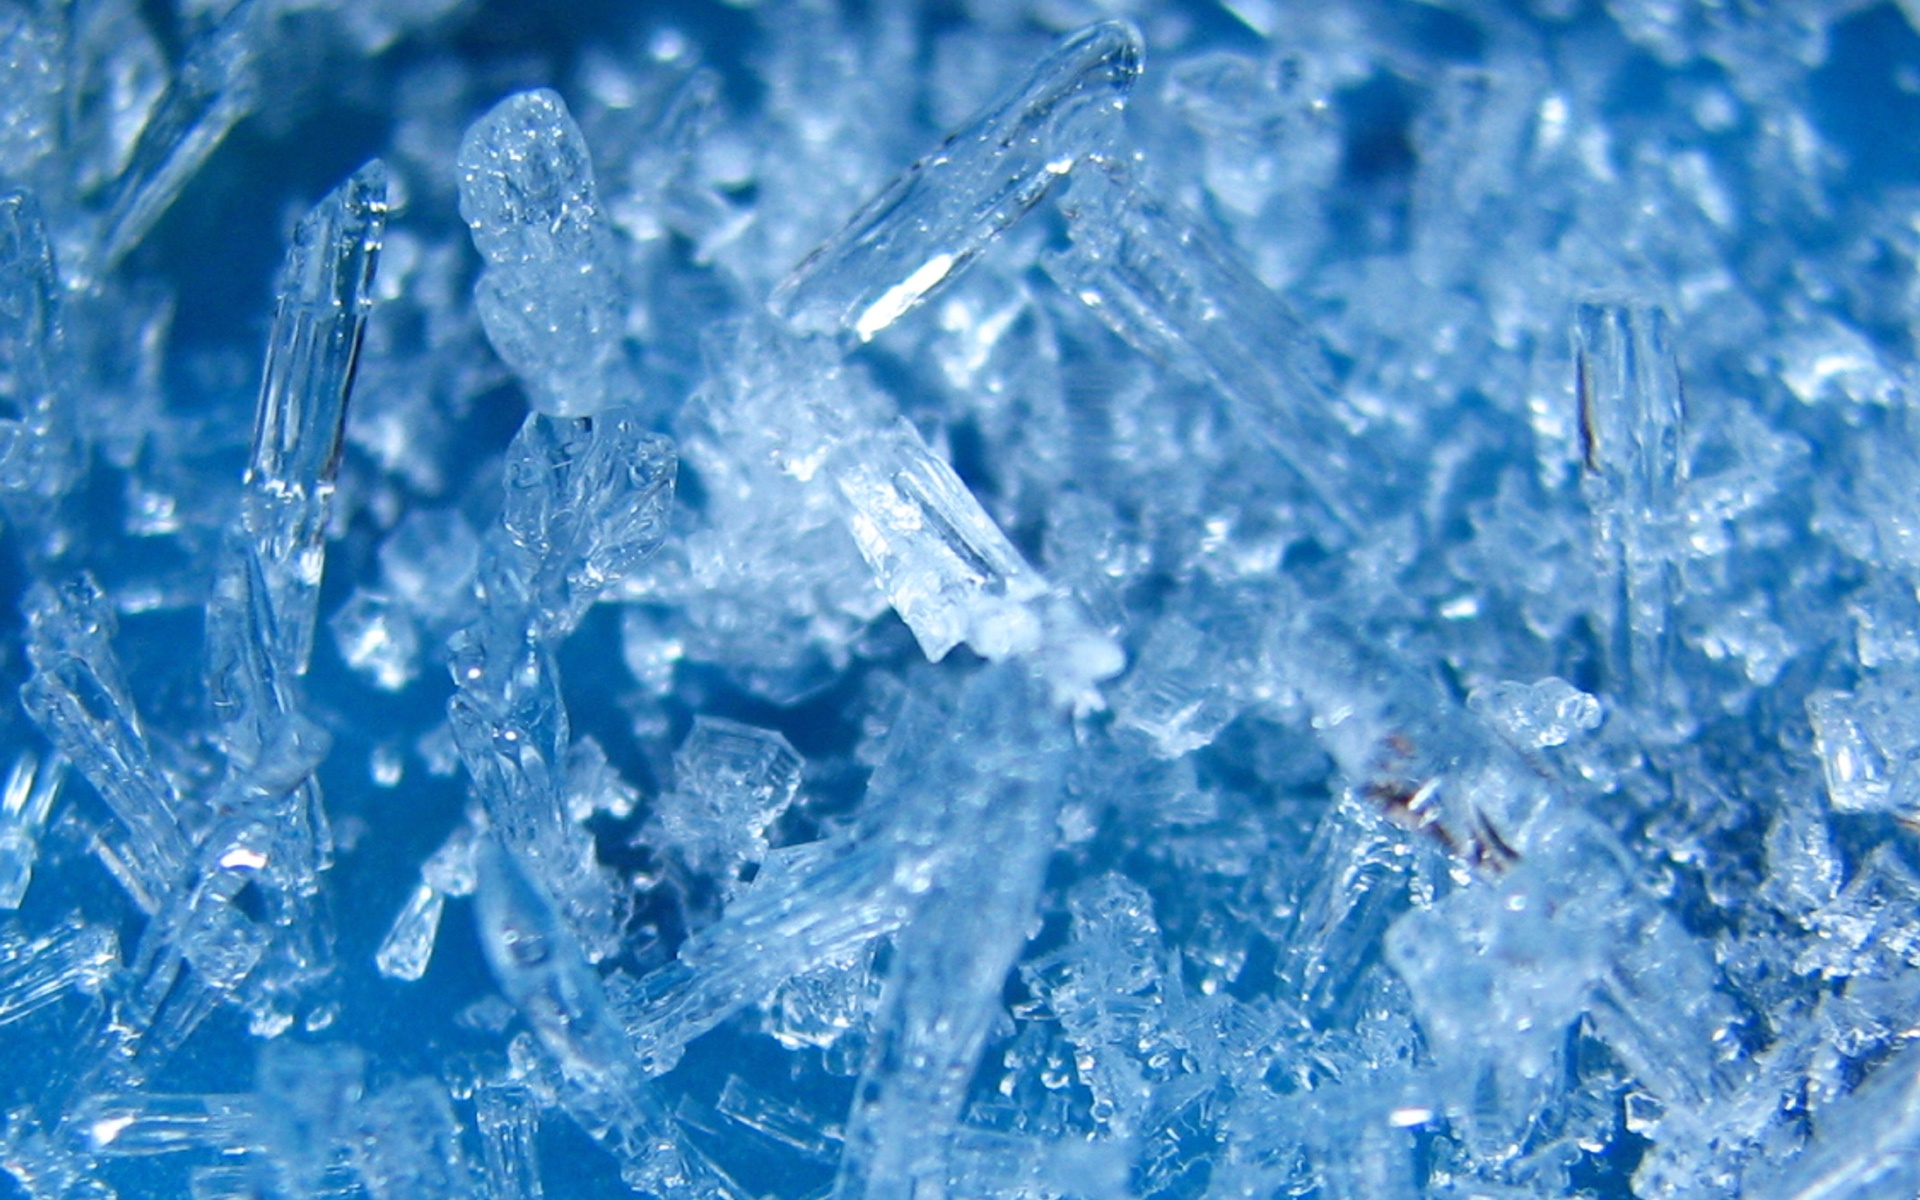 Ice crystals 1920x1200 wallpaper download page 672121 1920x1200